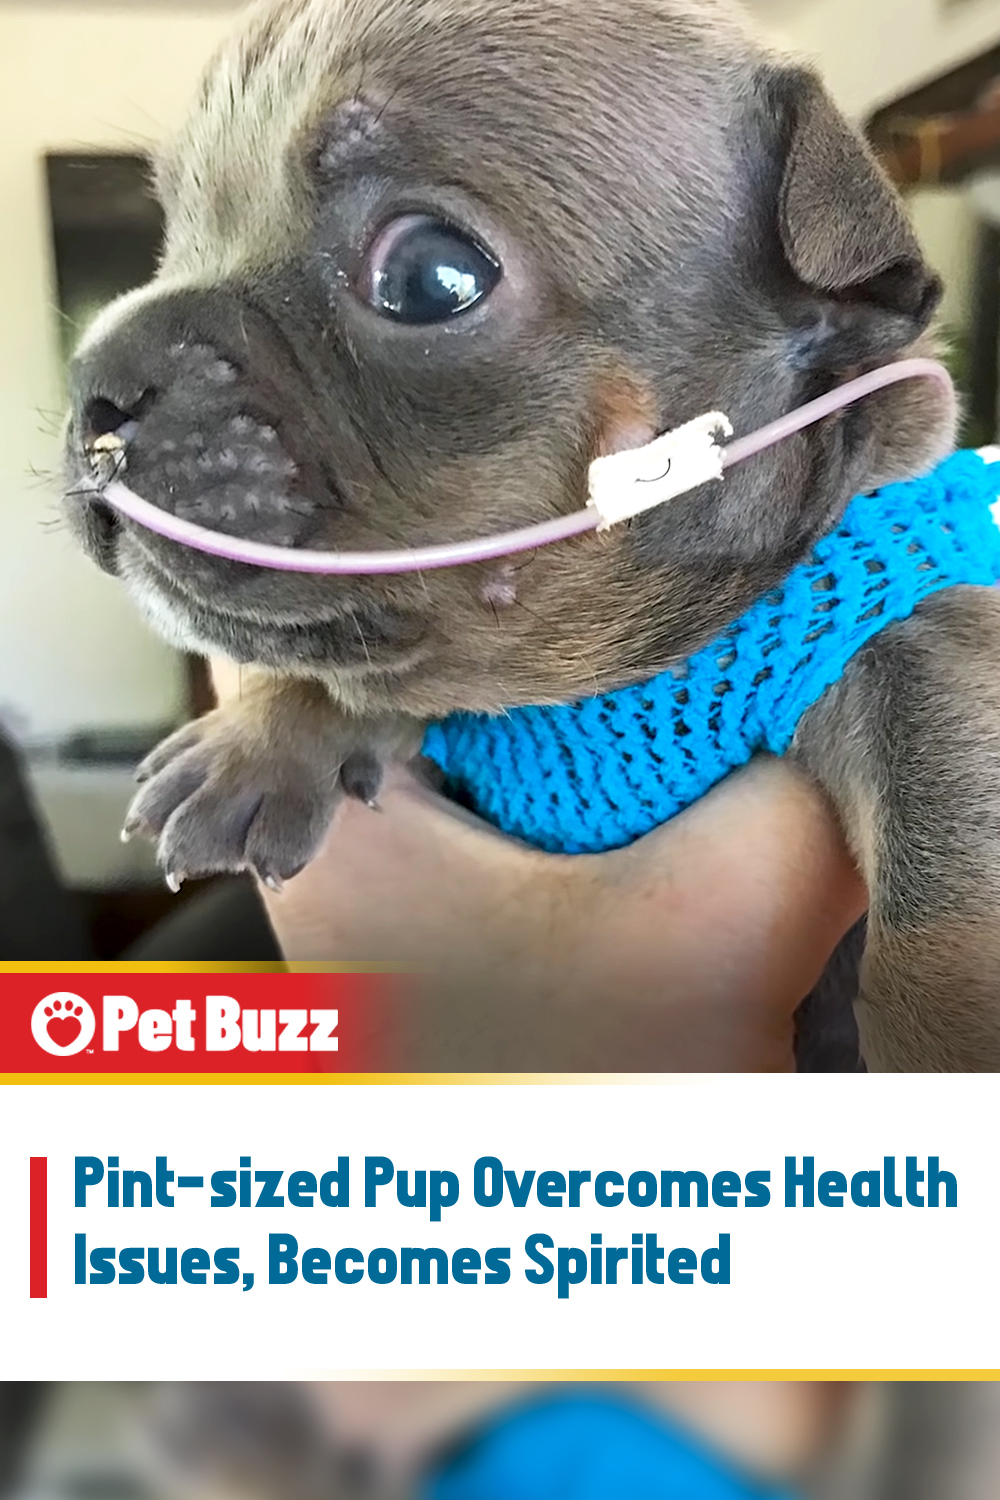 Pint-sized Pup Overcomes Health Issues, Becomes Spirited